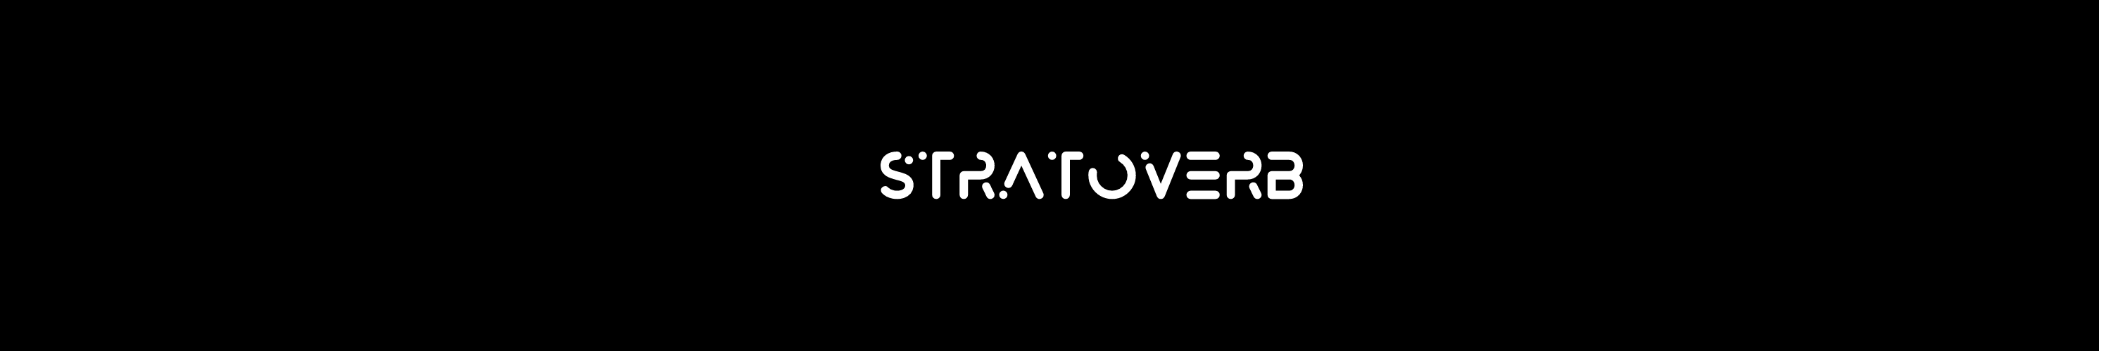 Stratoverb